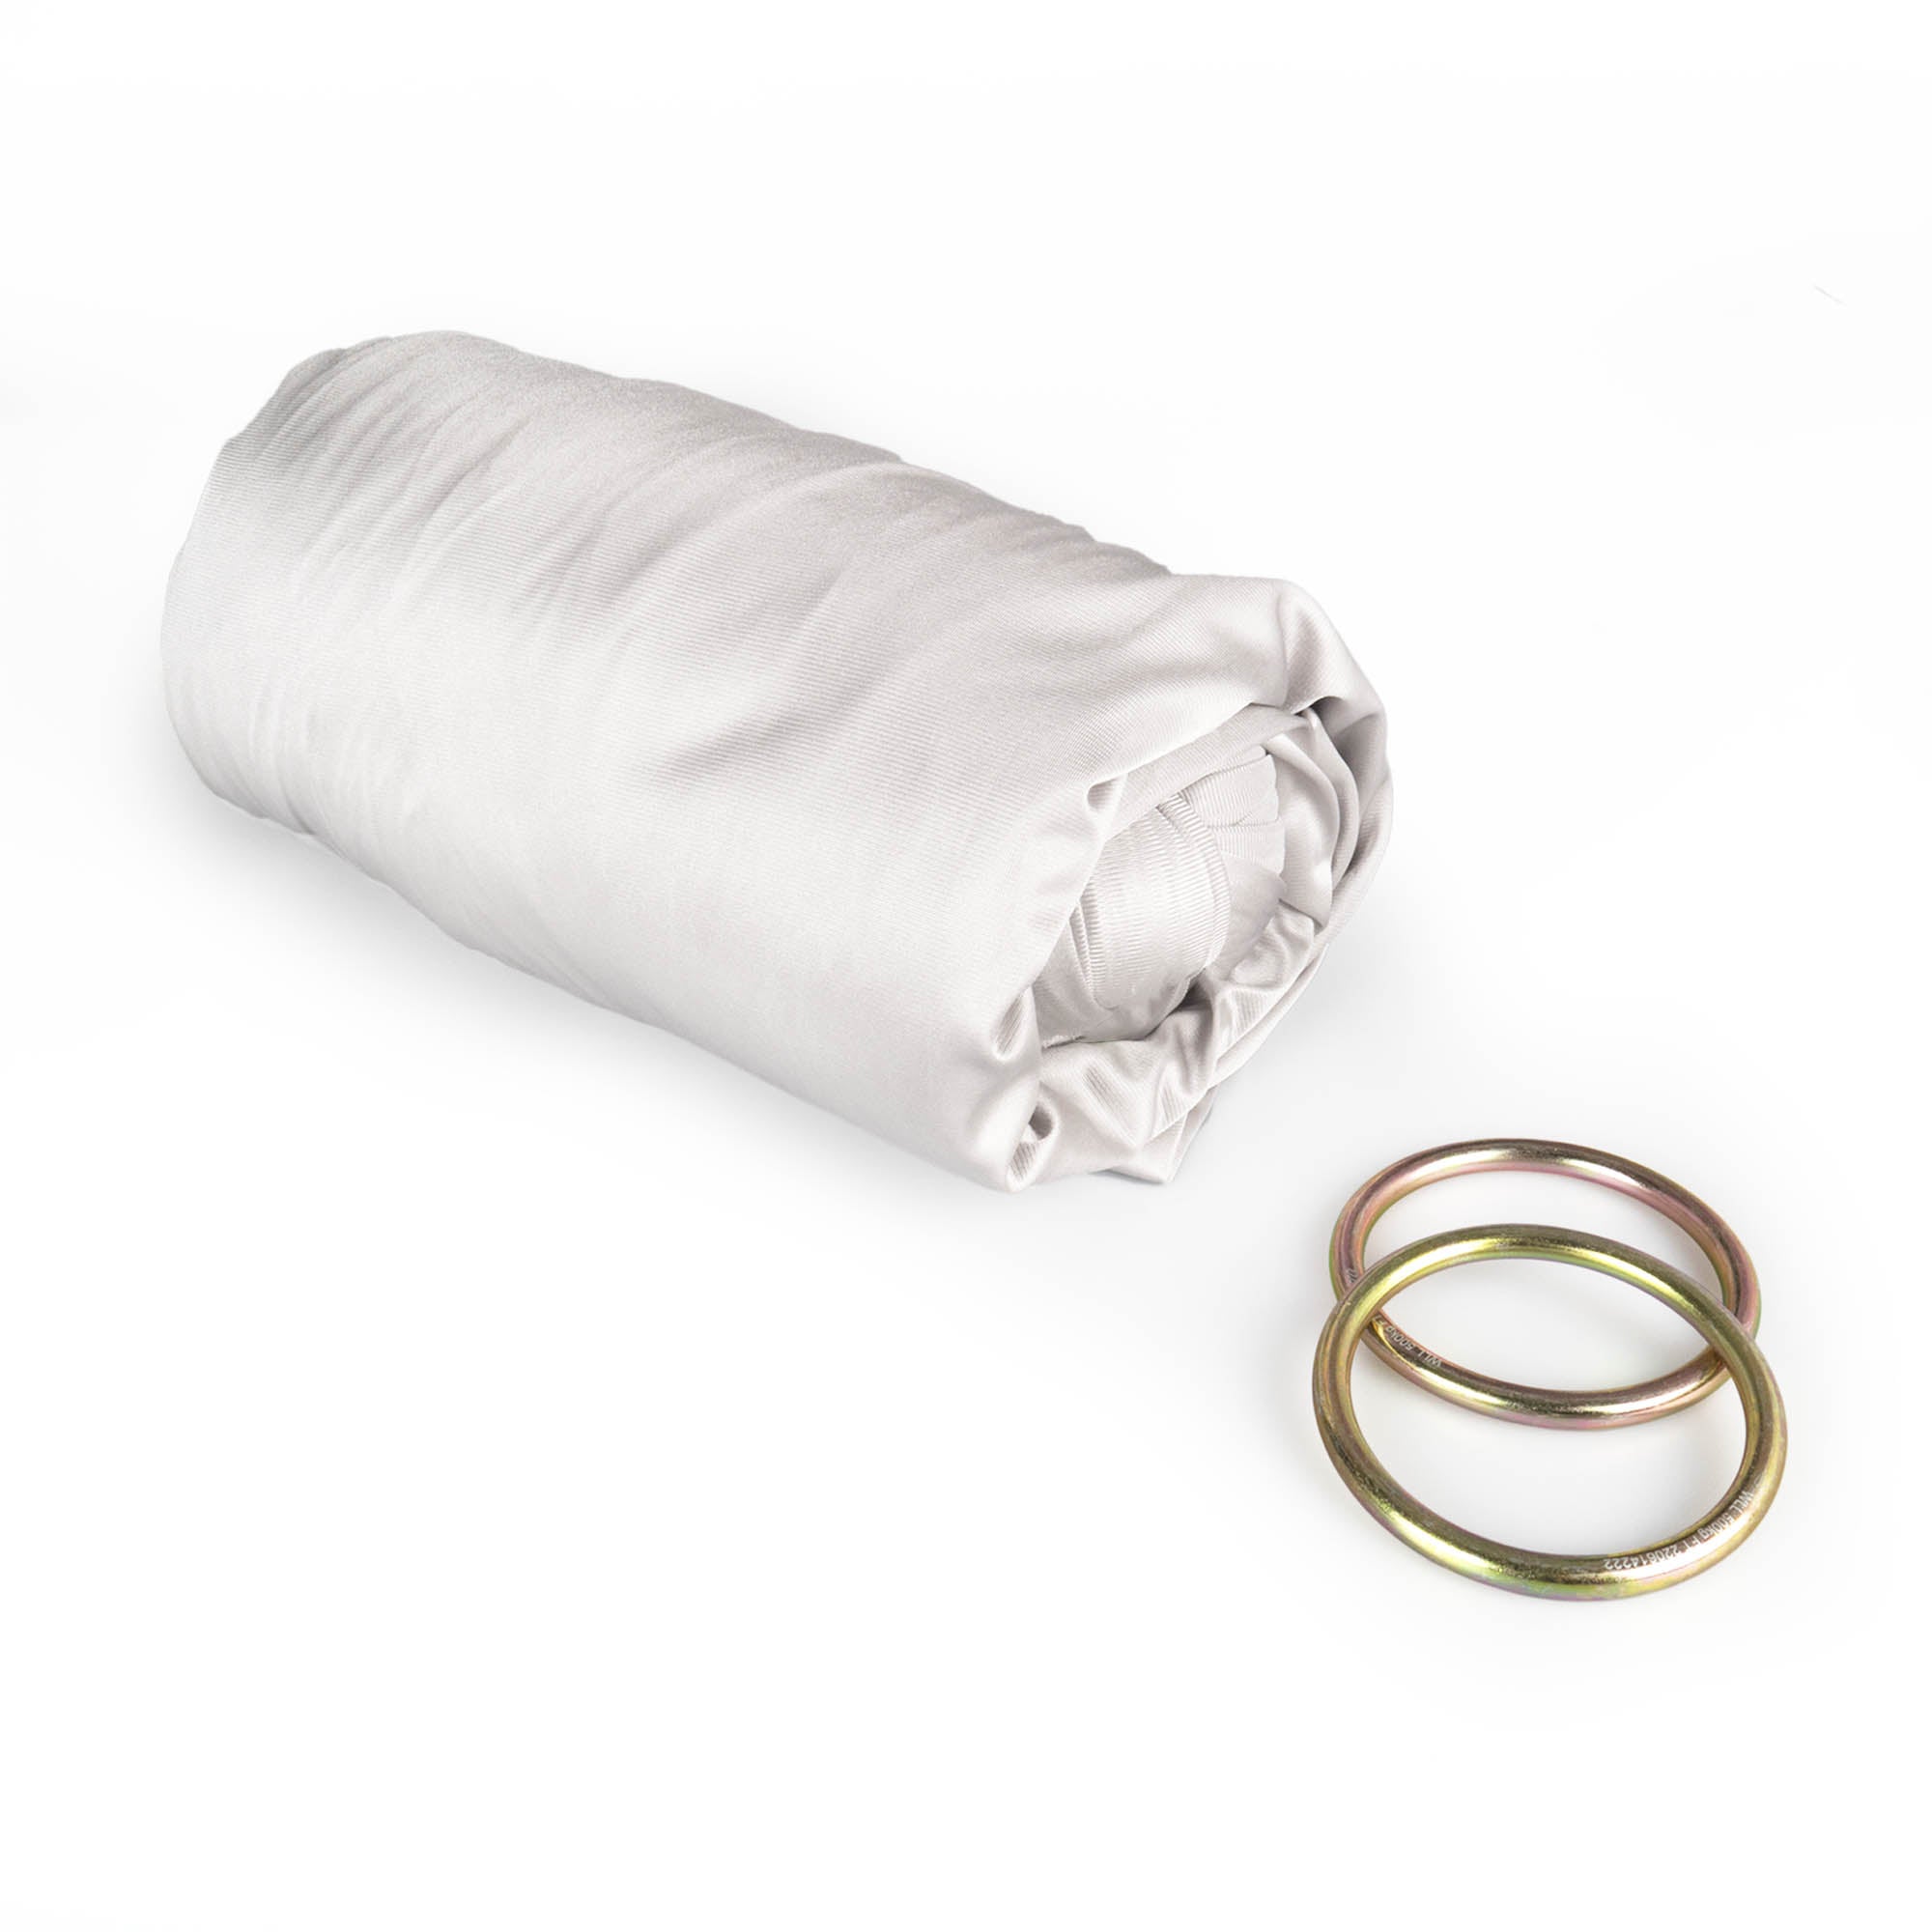 Silver yoga hammock rolled up with rings detached